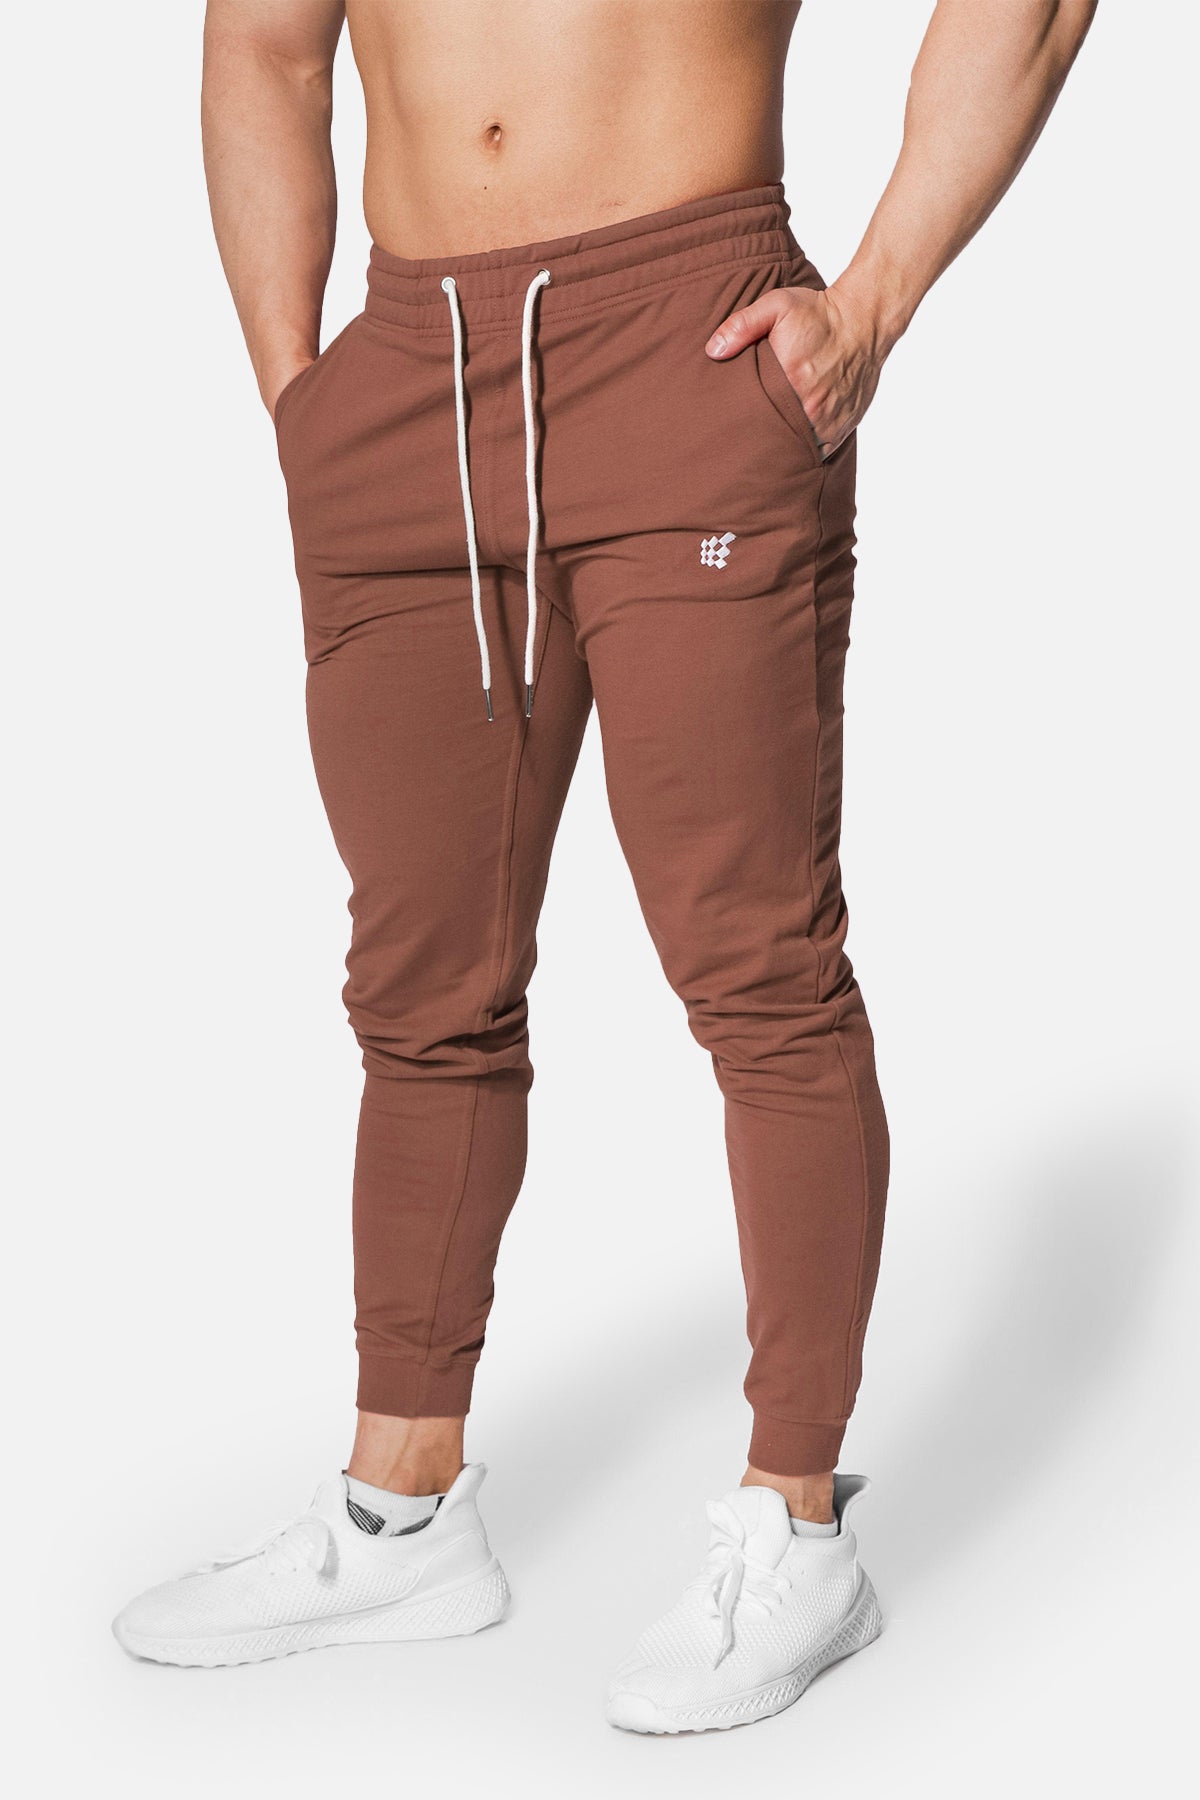 Jed North Joggers  Everyday essentials products, Clothes design